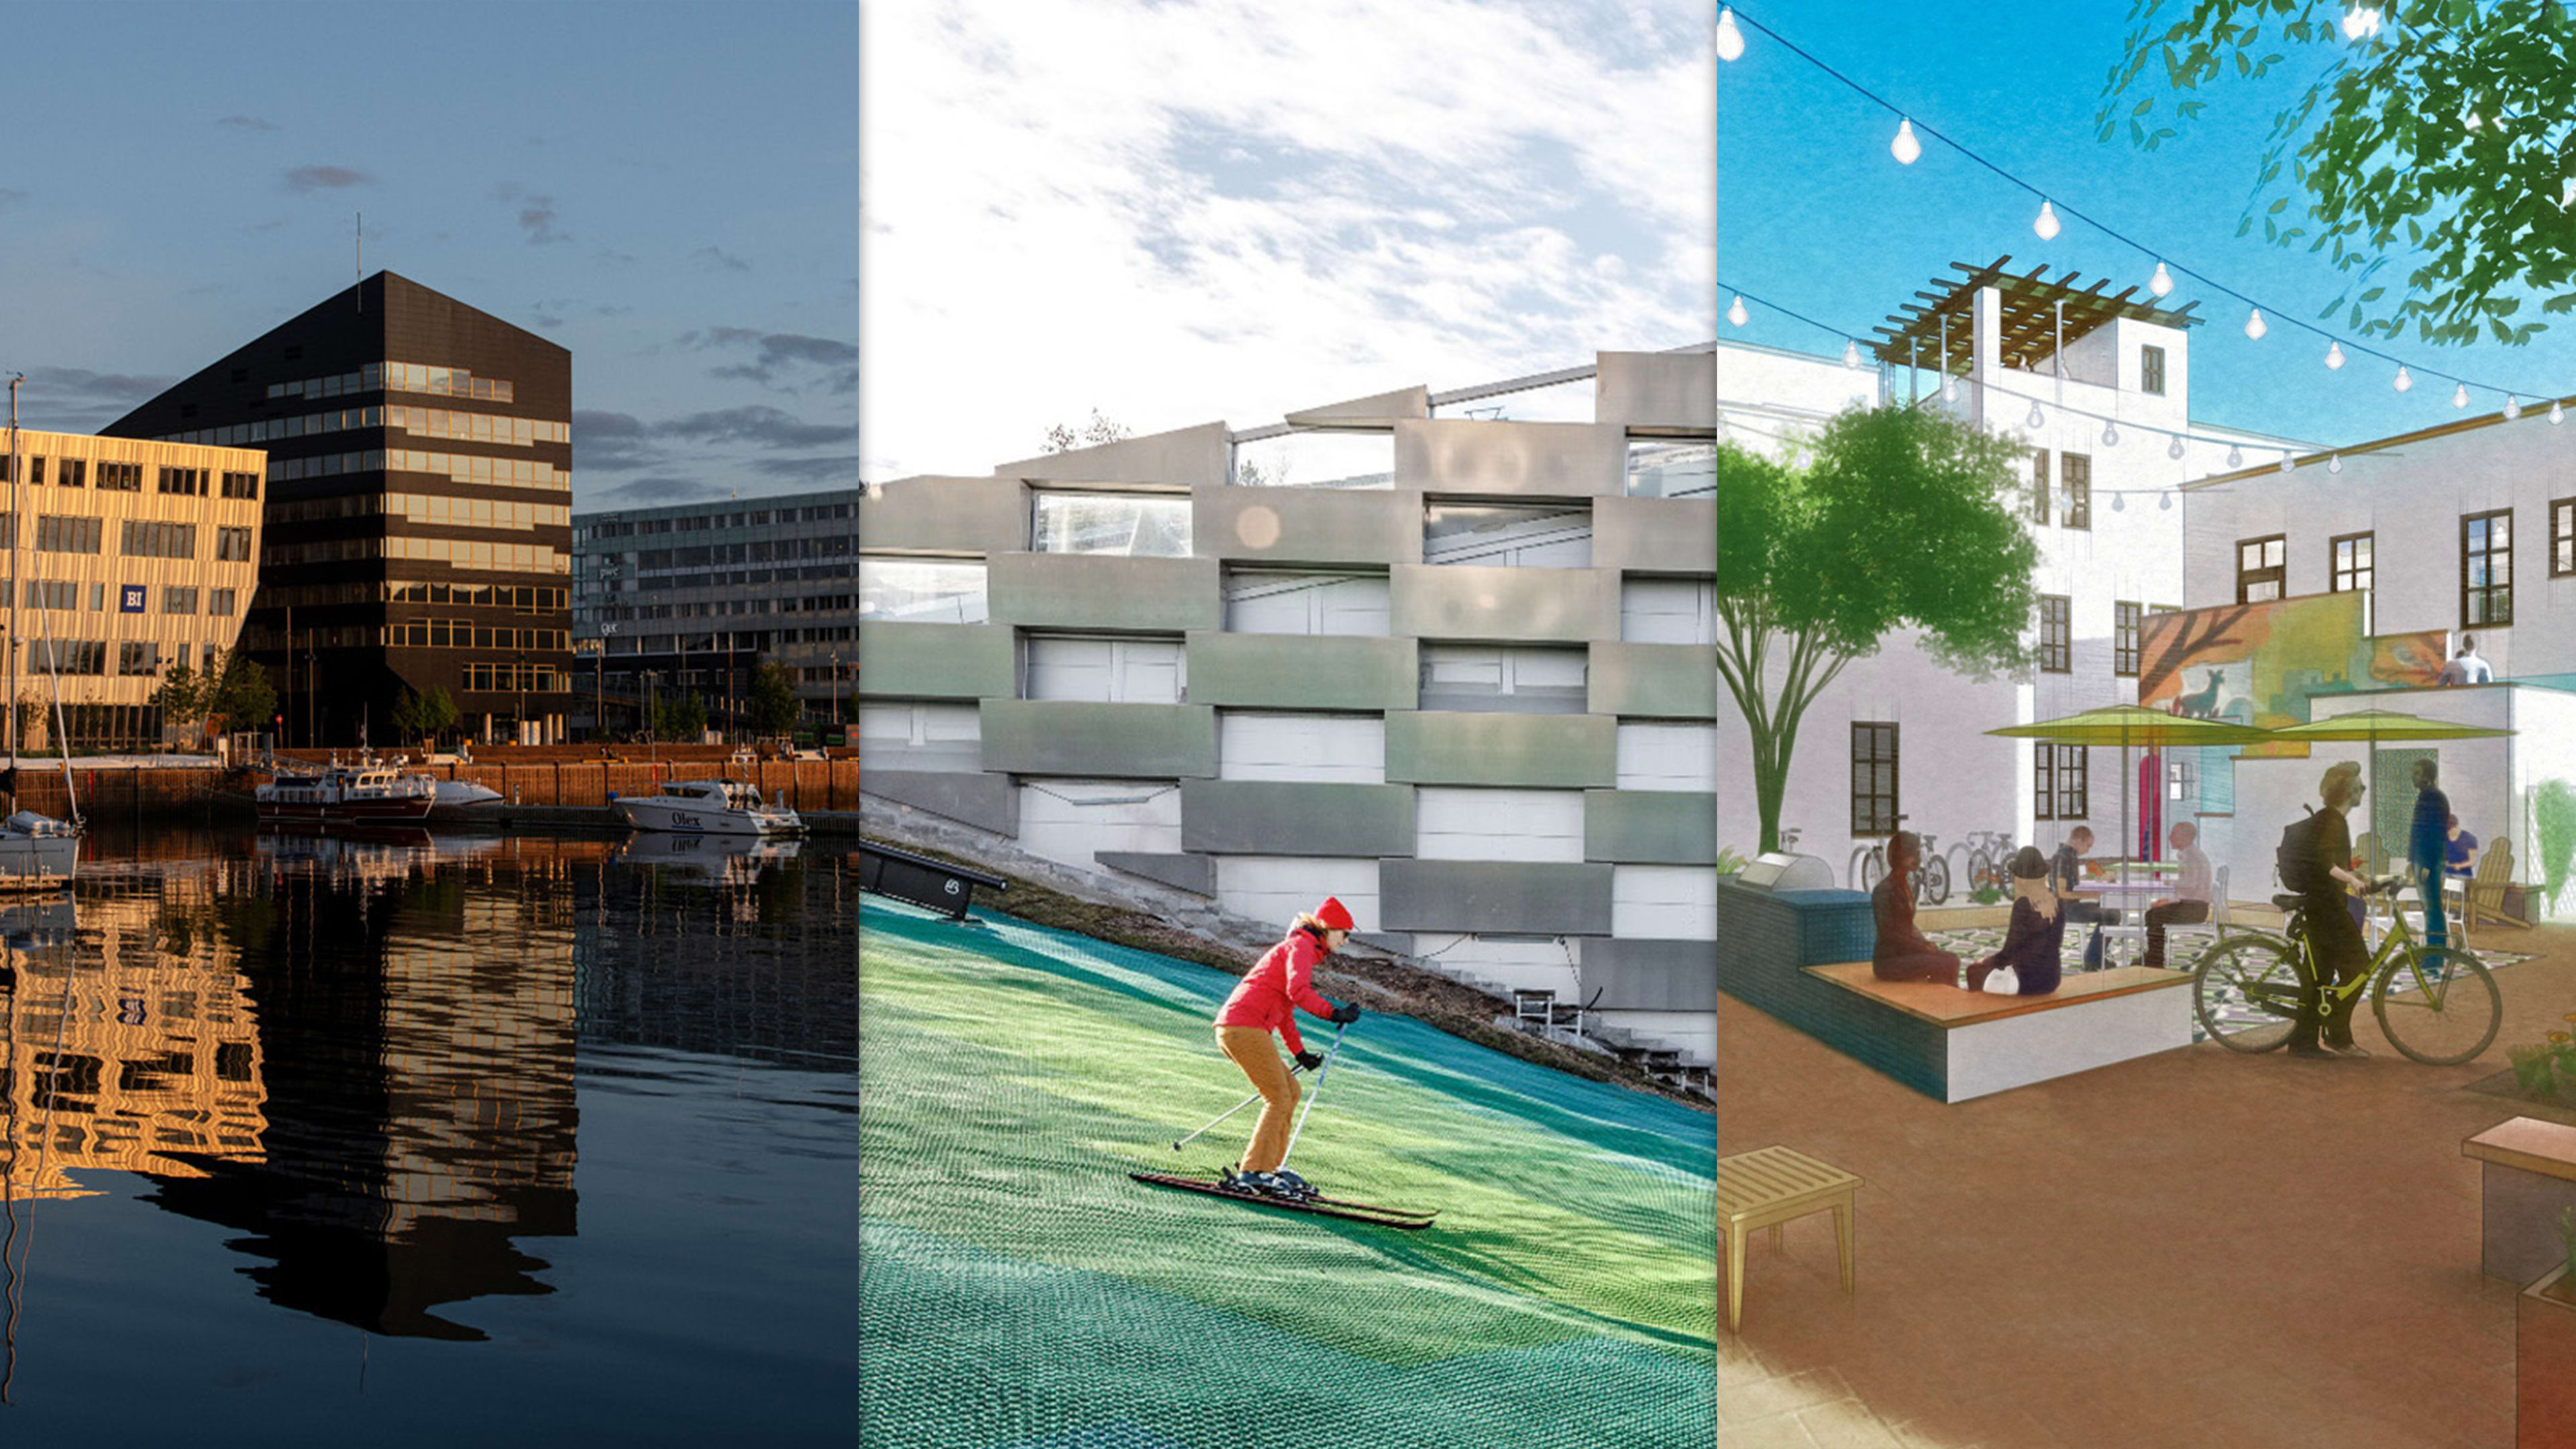 5 bold urban design projects that made cities more fun, clean, and accessible in 2019